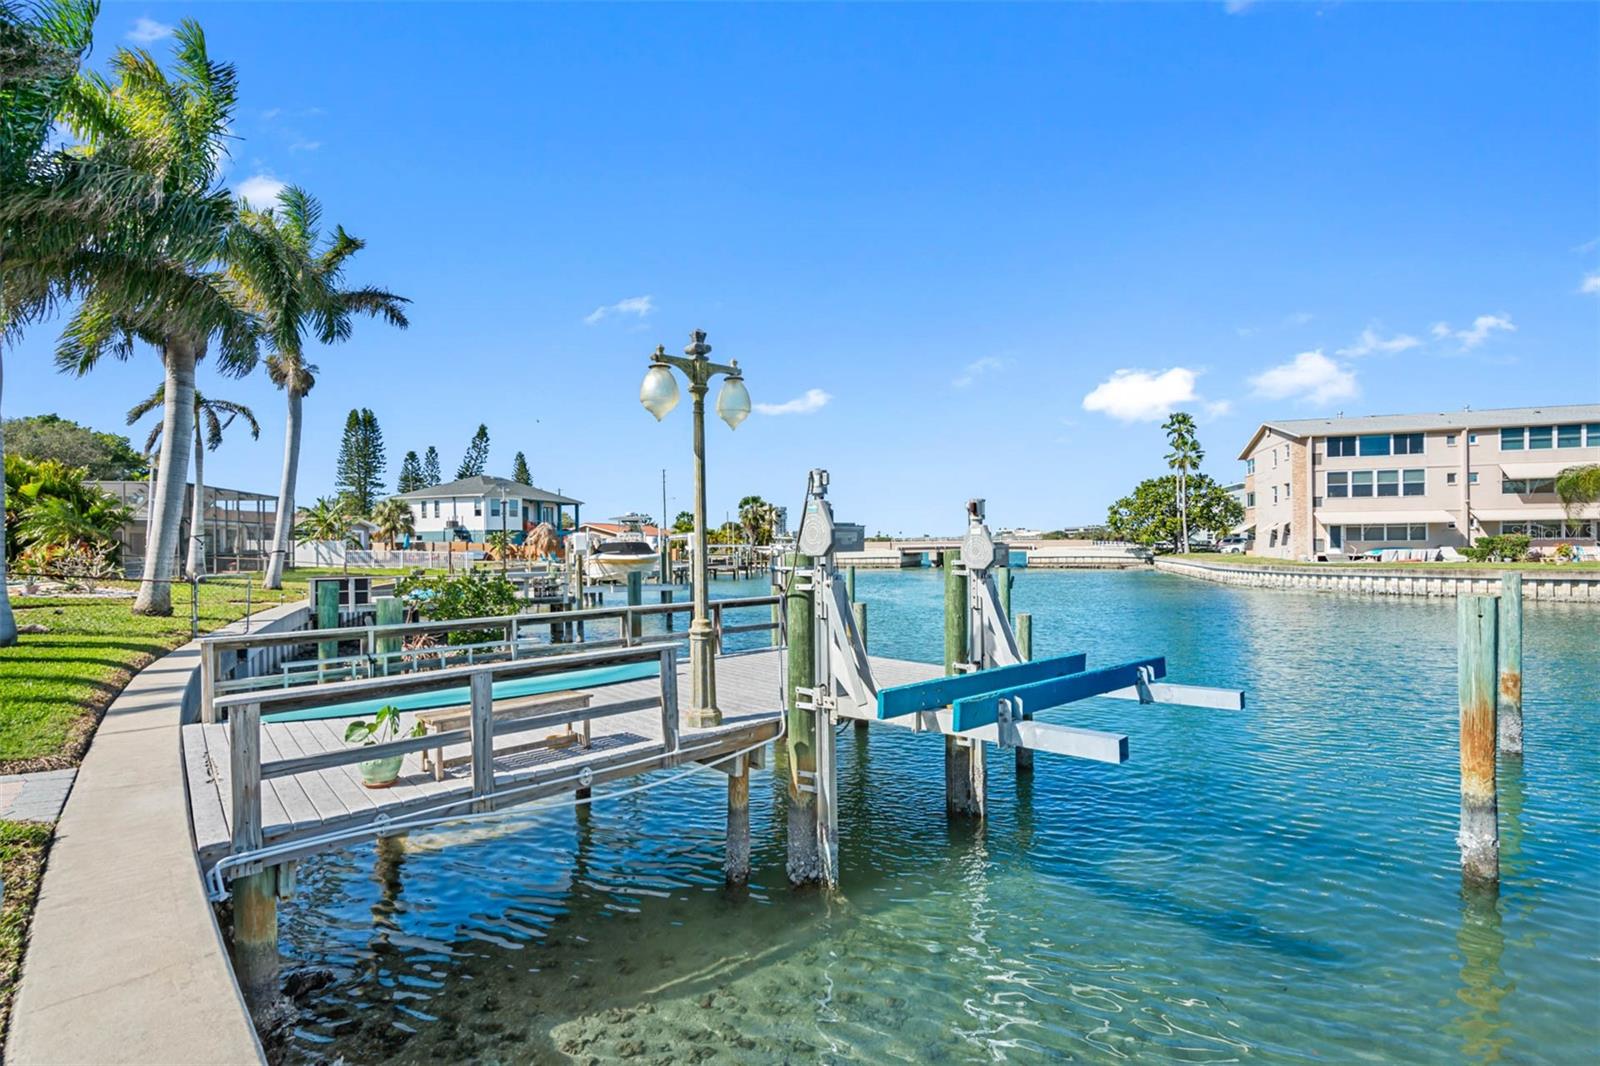 Bring your boats. Yes, we said boats! The 30 foot deep by 12 feet wide dock with electricity and water host am Aluminator 6000-pound boat lift for a dry slip, and also includes pilings for two large wet slips.